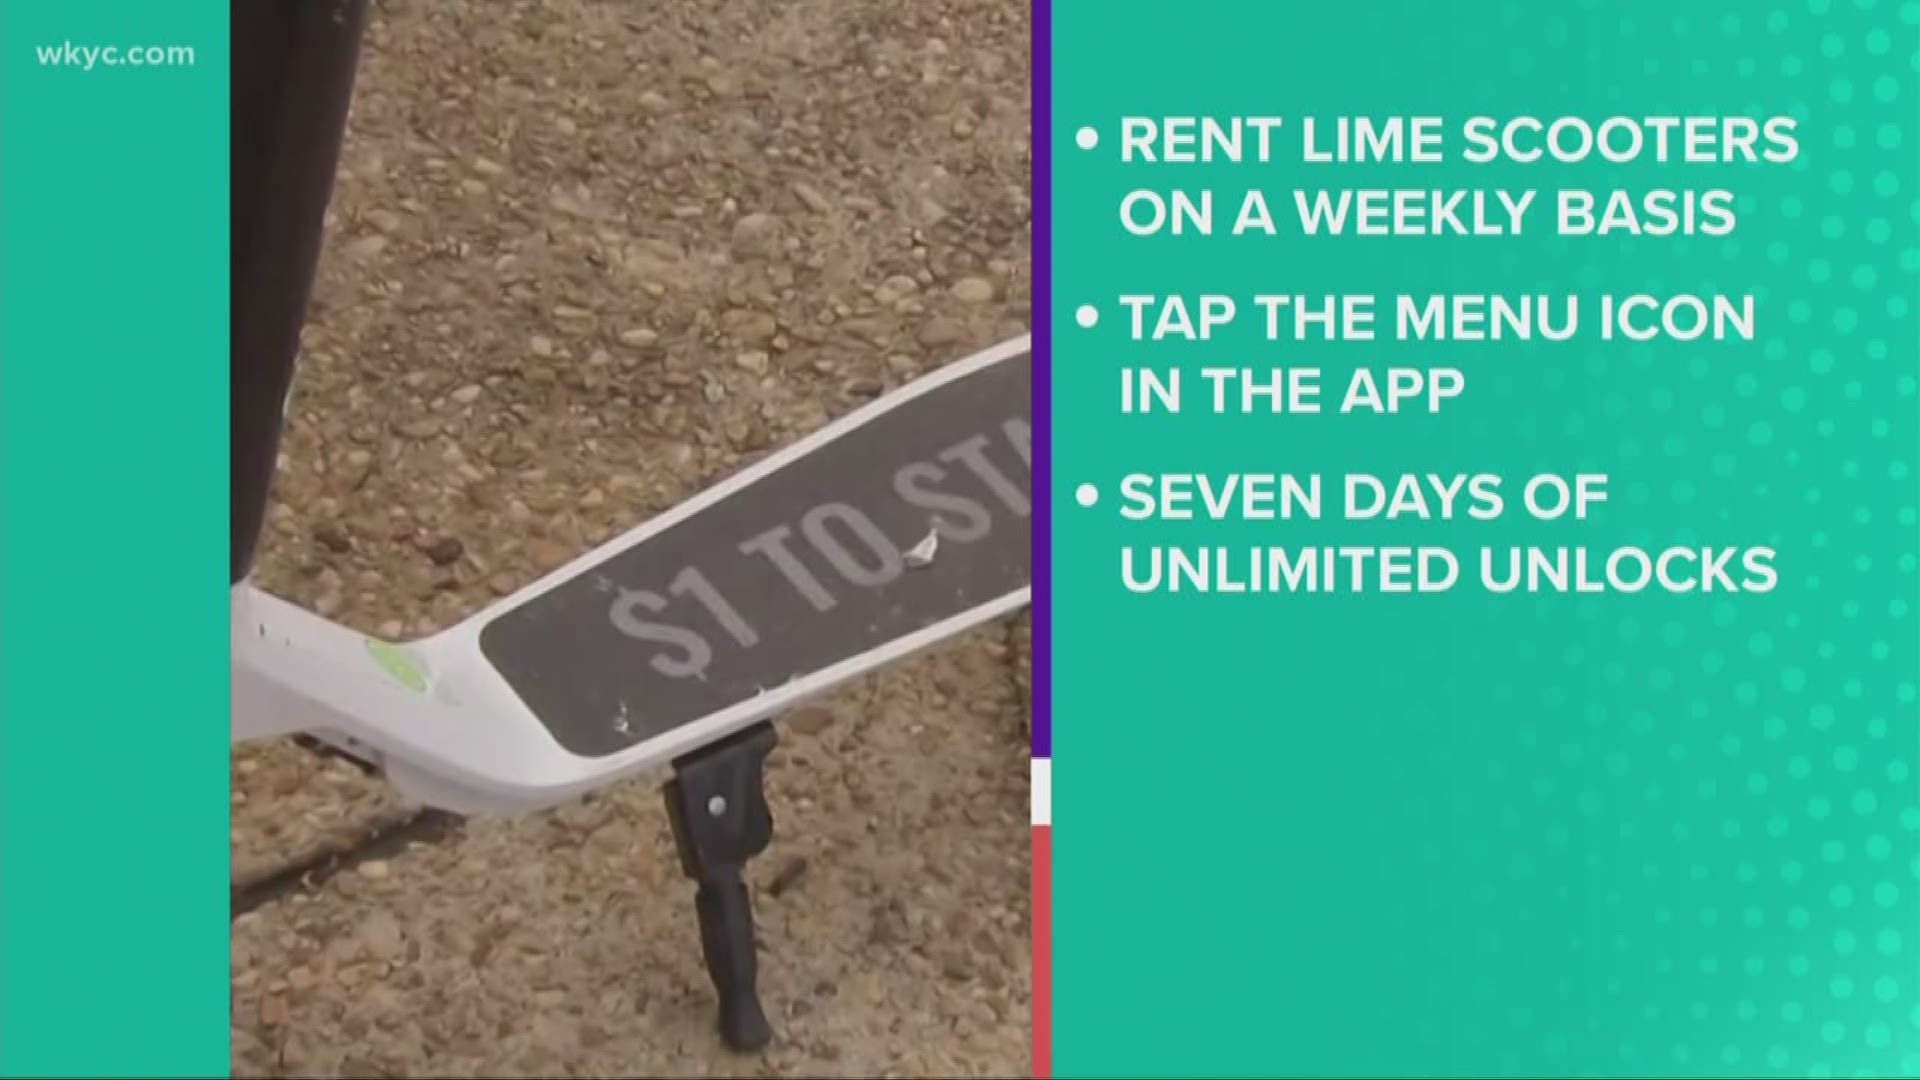 On Tuesday, Lime launched LimePass. For $5, you can get a weekly pass that allows you to get unlimited scooter unlocks for seven straight days.